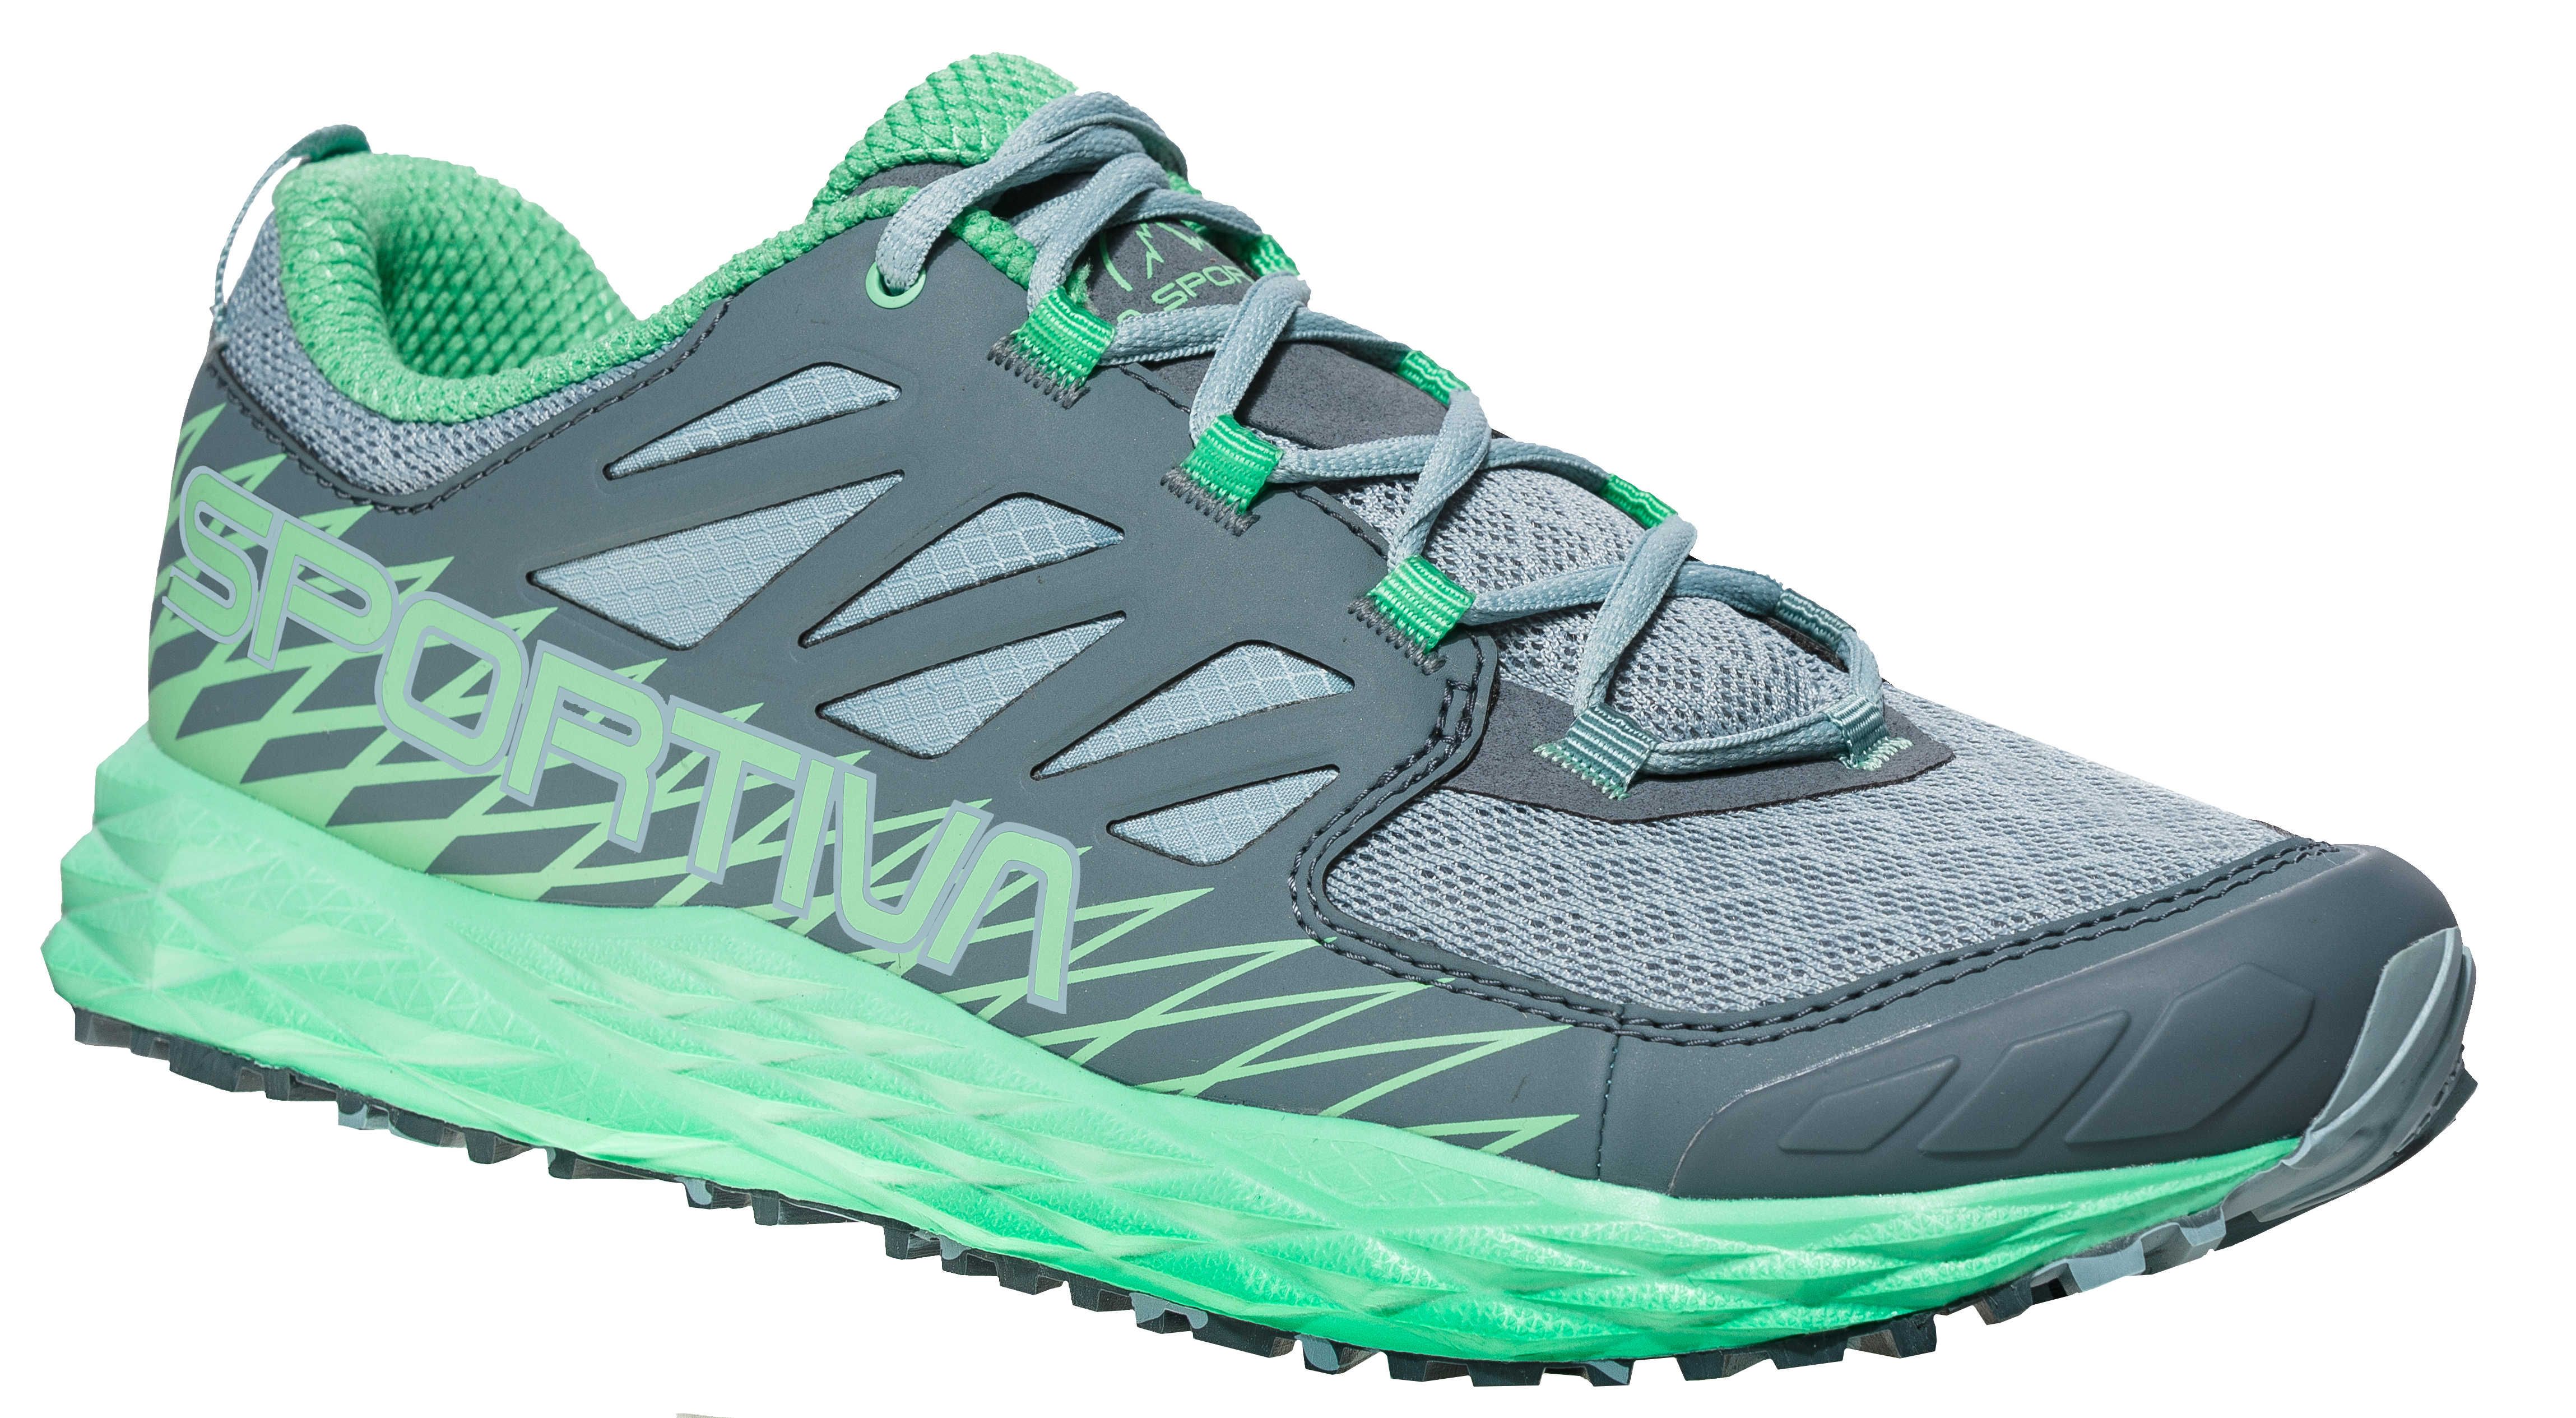 Chaussure Trail Femme Lycan - Stone Blue/Jade Green